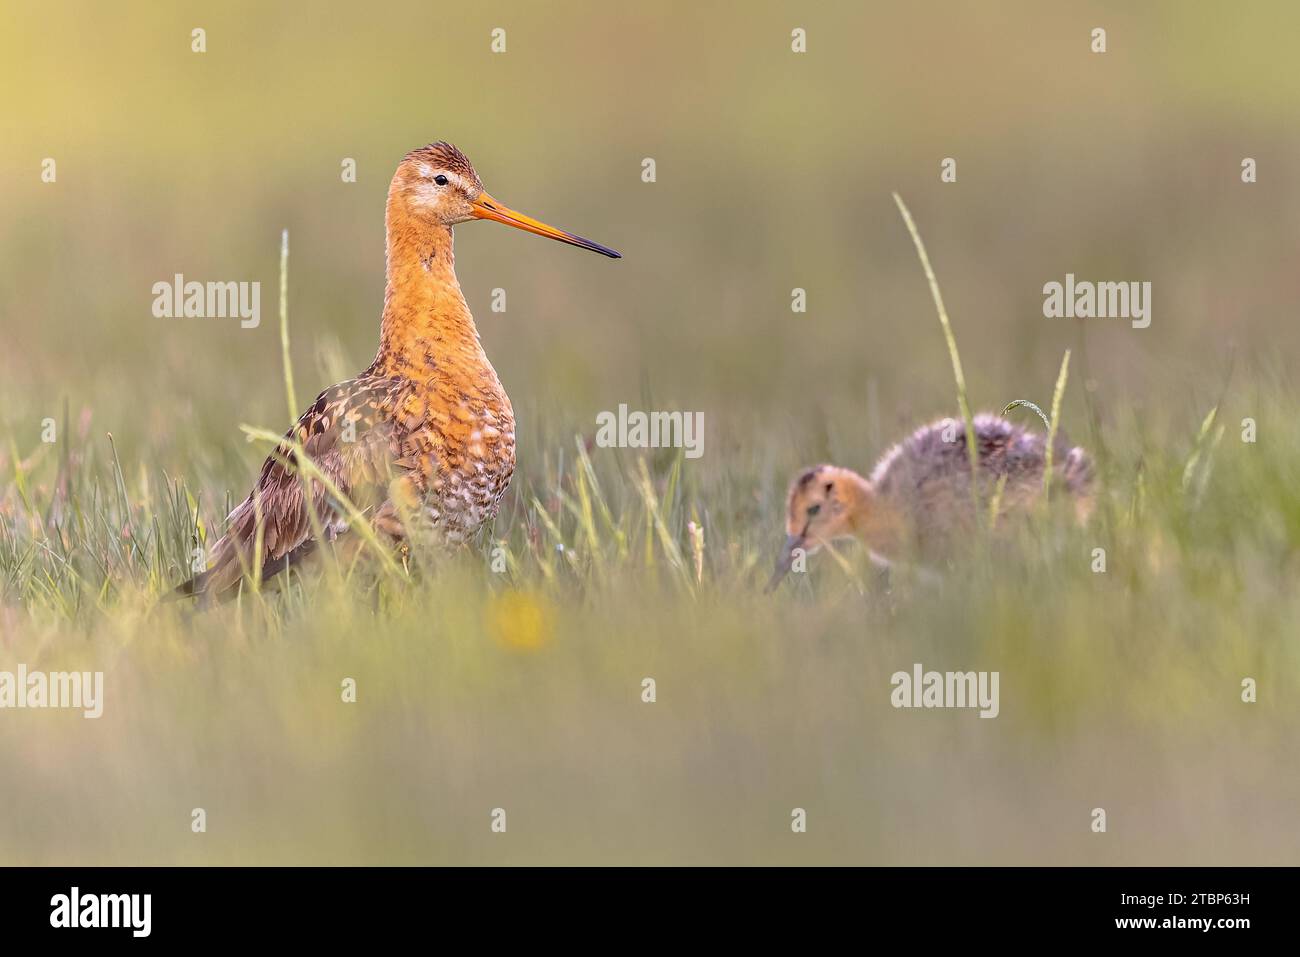 Black-tailed Godwit (Limosa limosa) wader bird in field with chick. Hatchlings of meadow bird forage for their own food. Parents are guarding. Wildlif Stock Photo